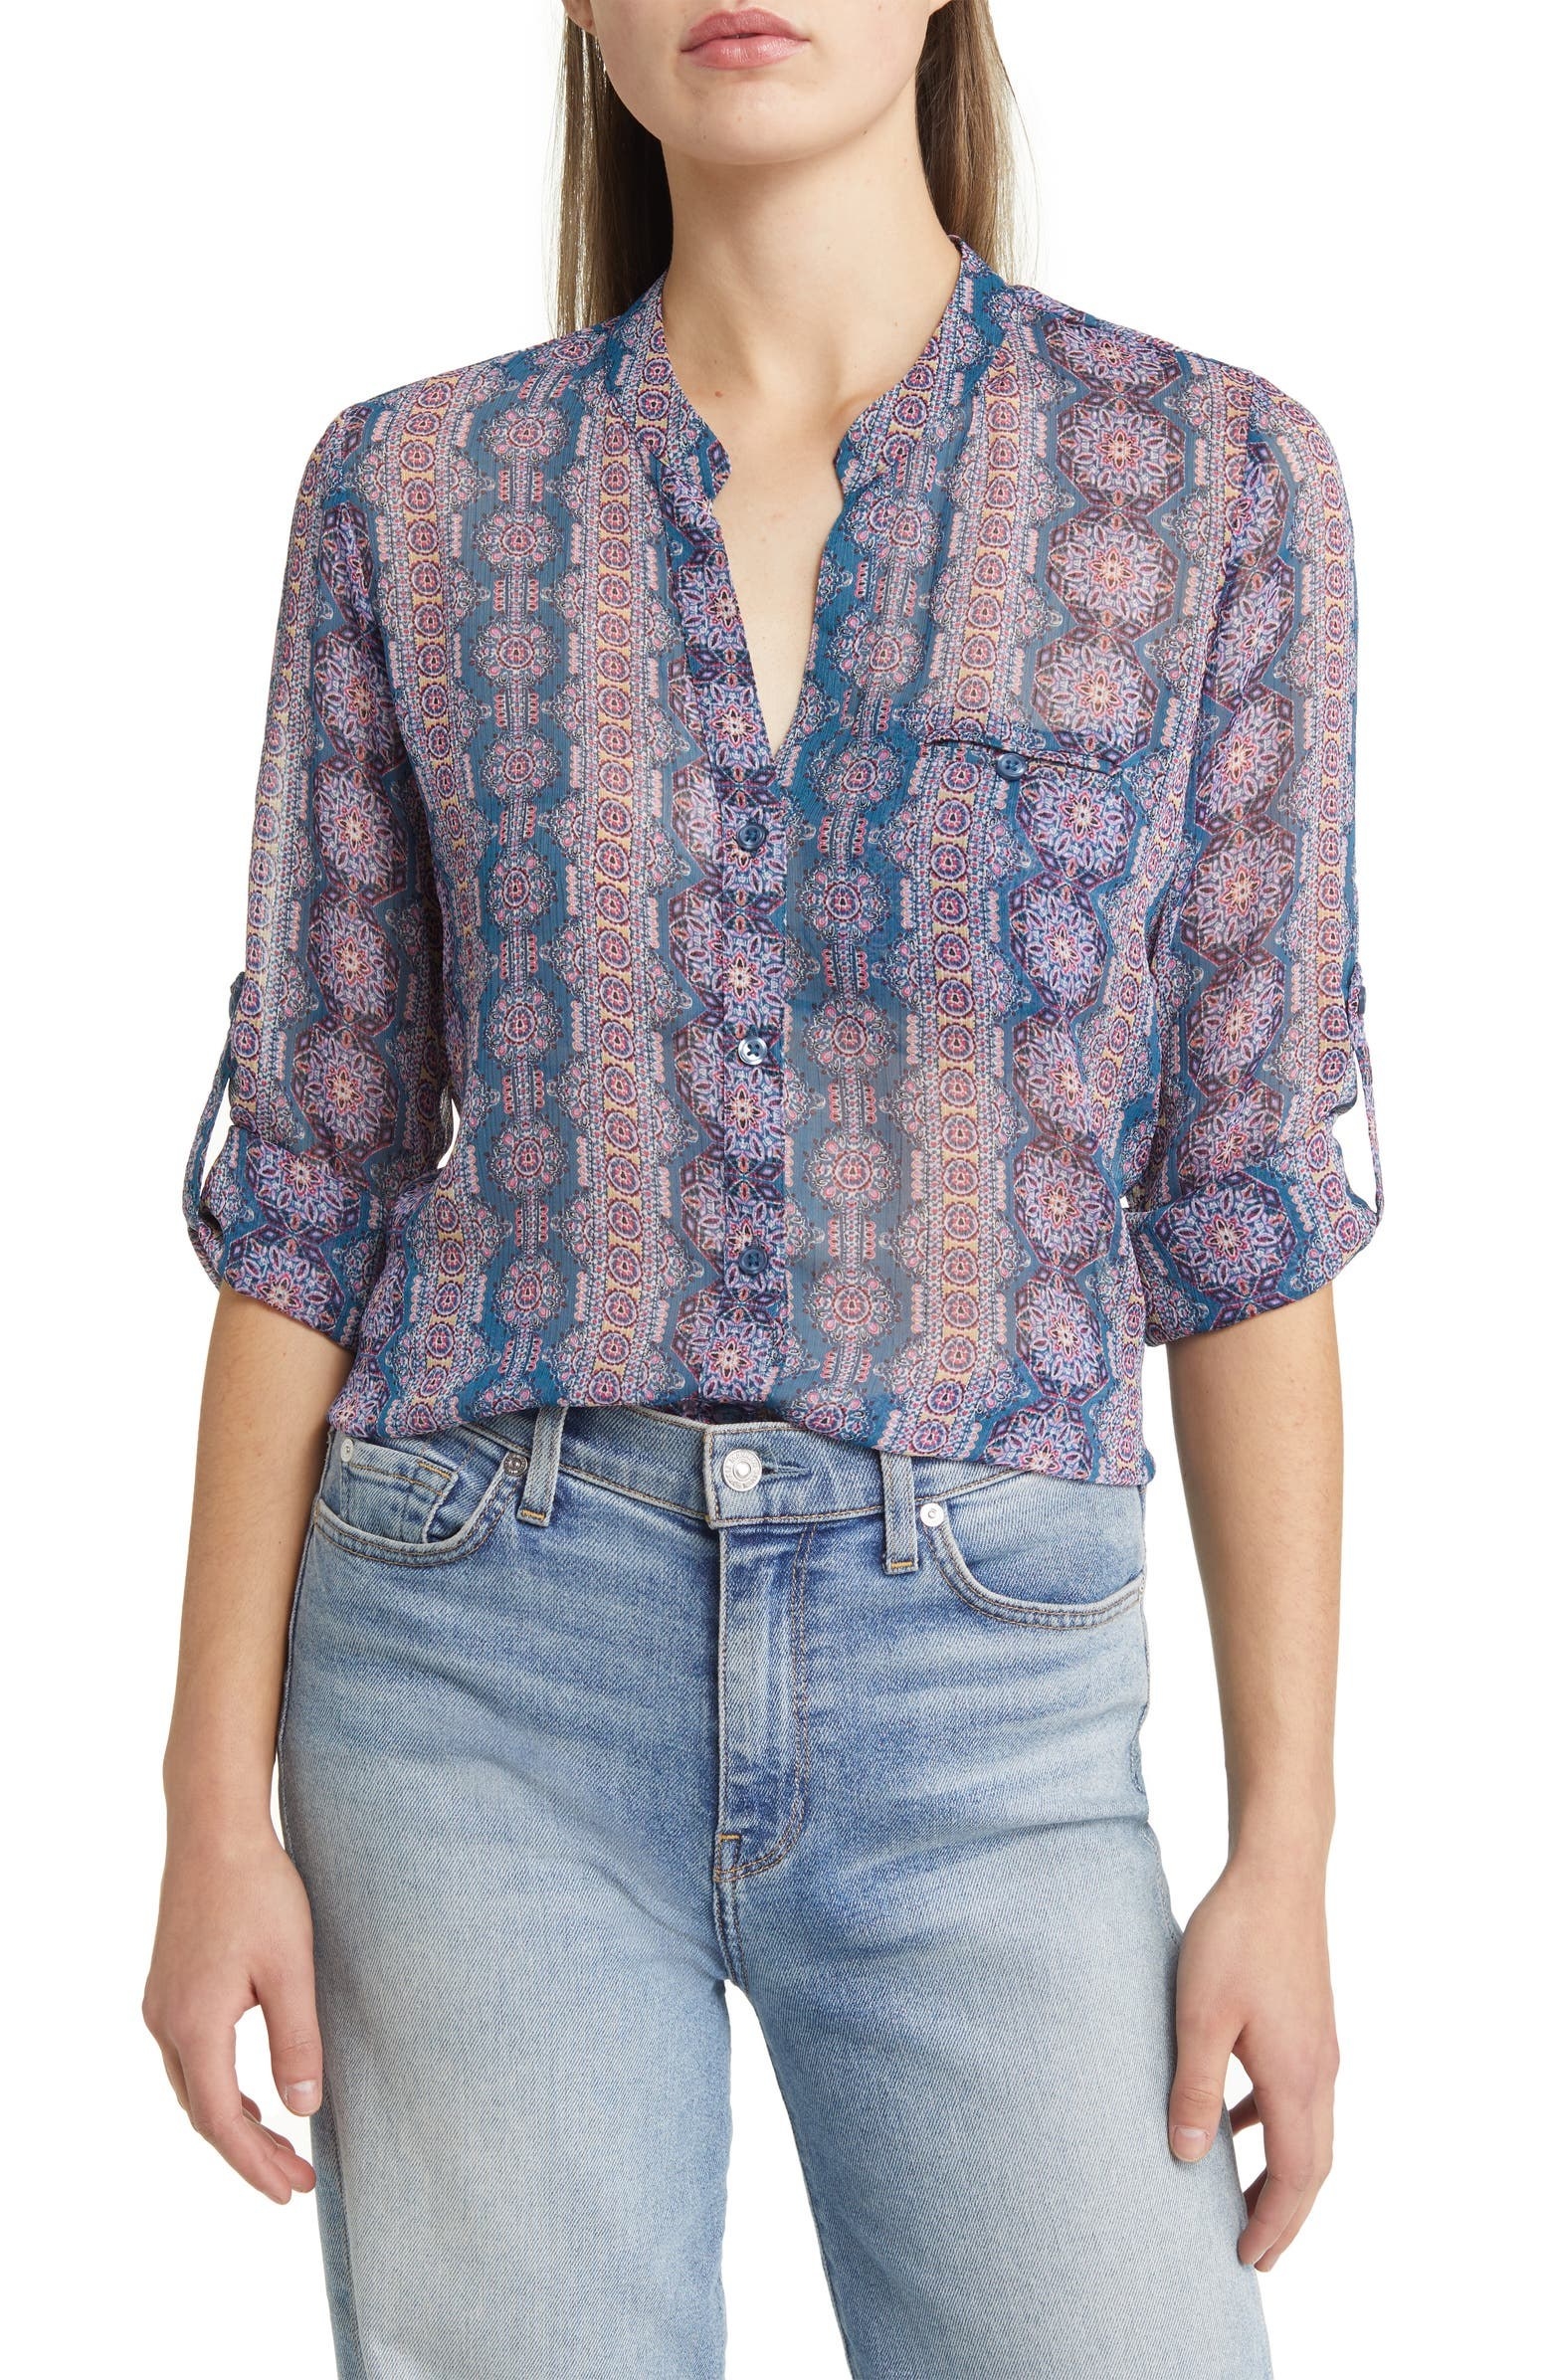 The patterned top